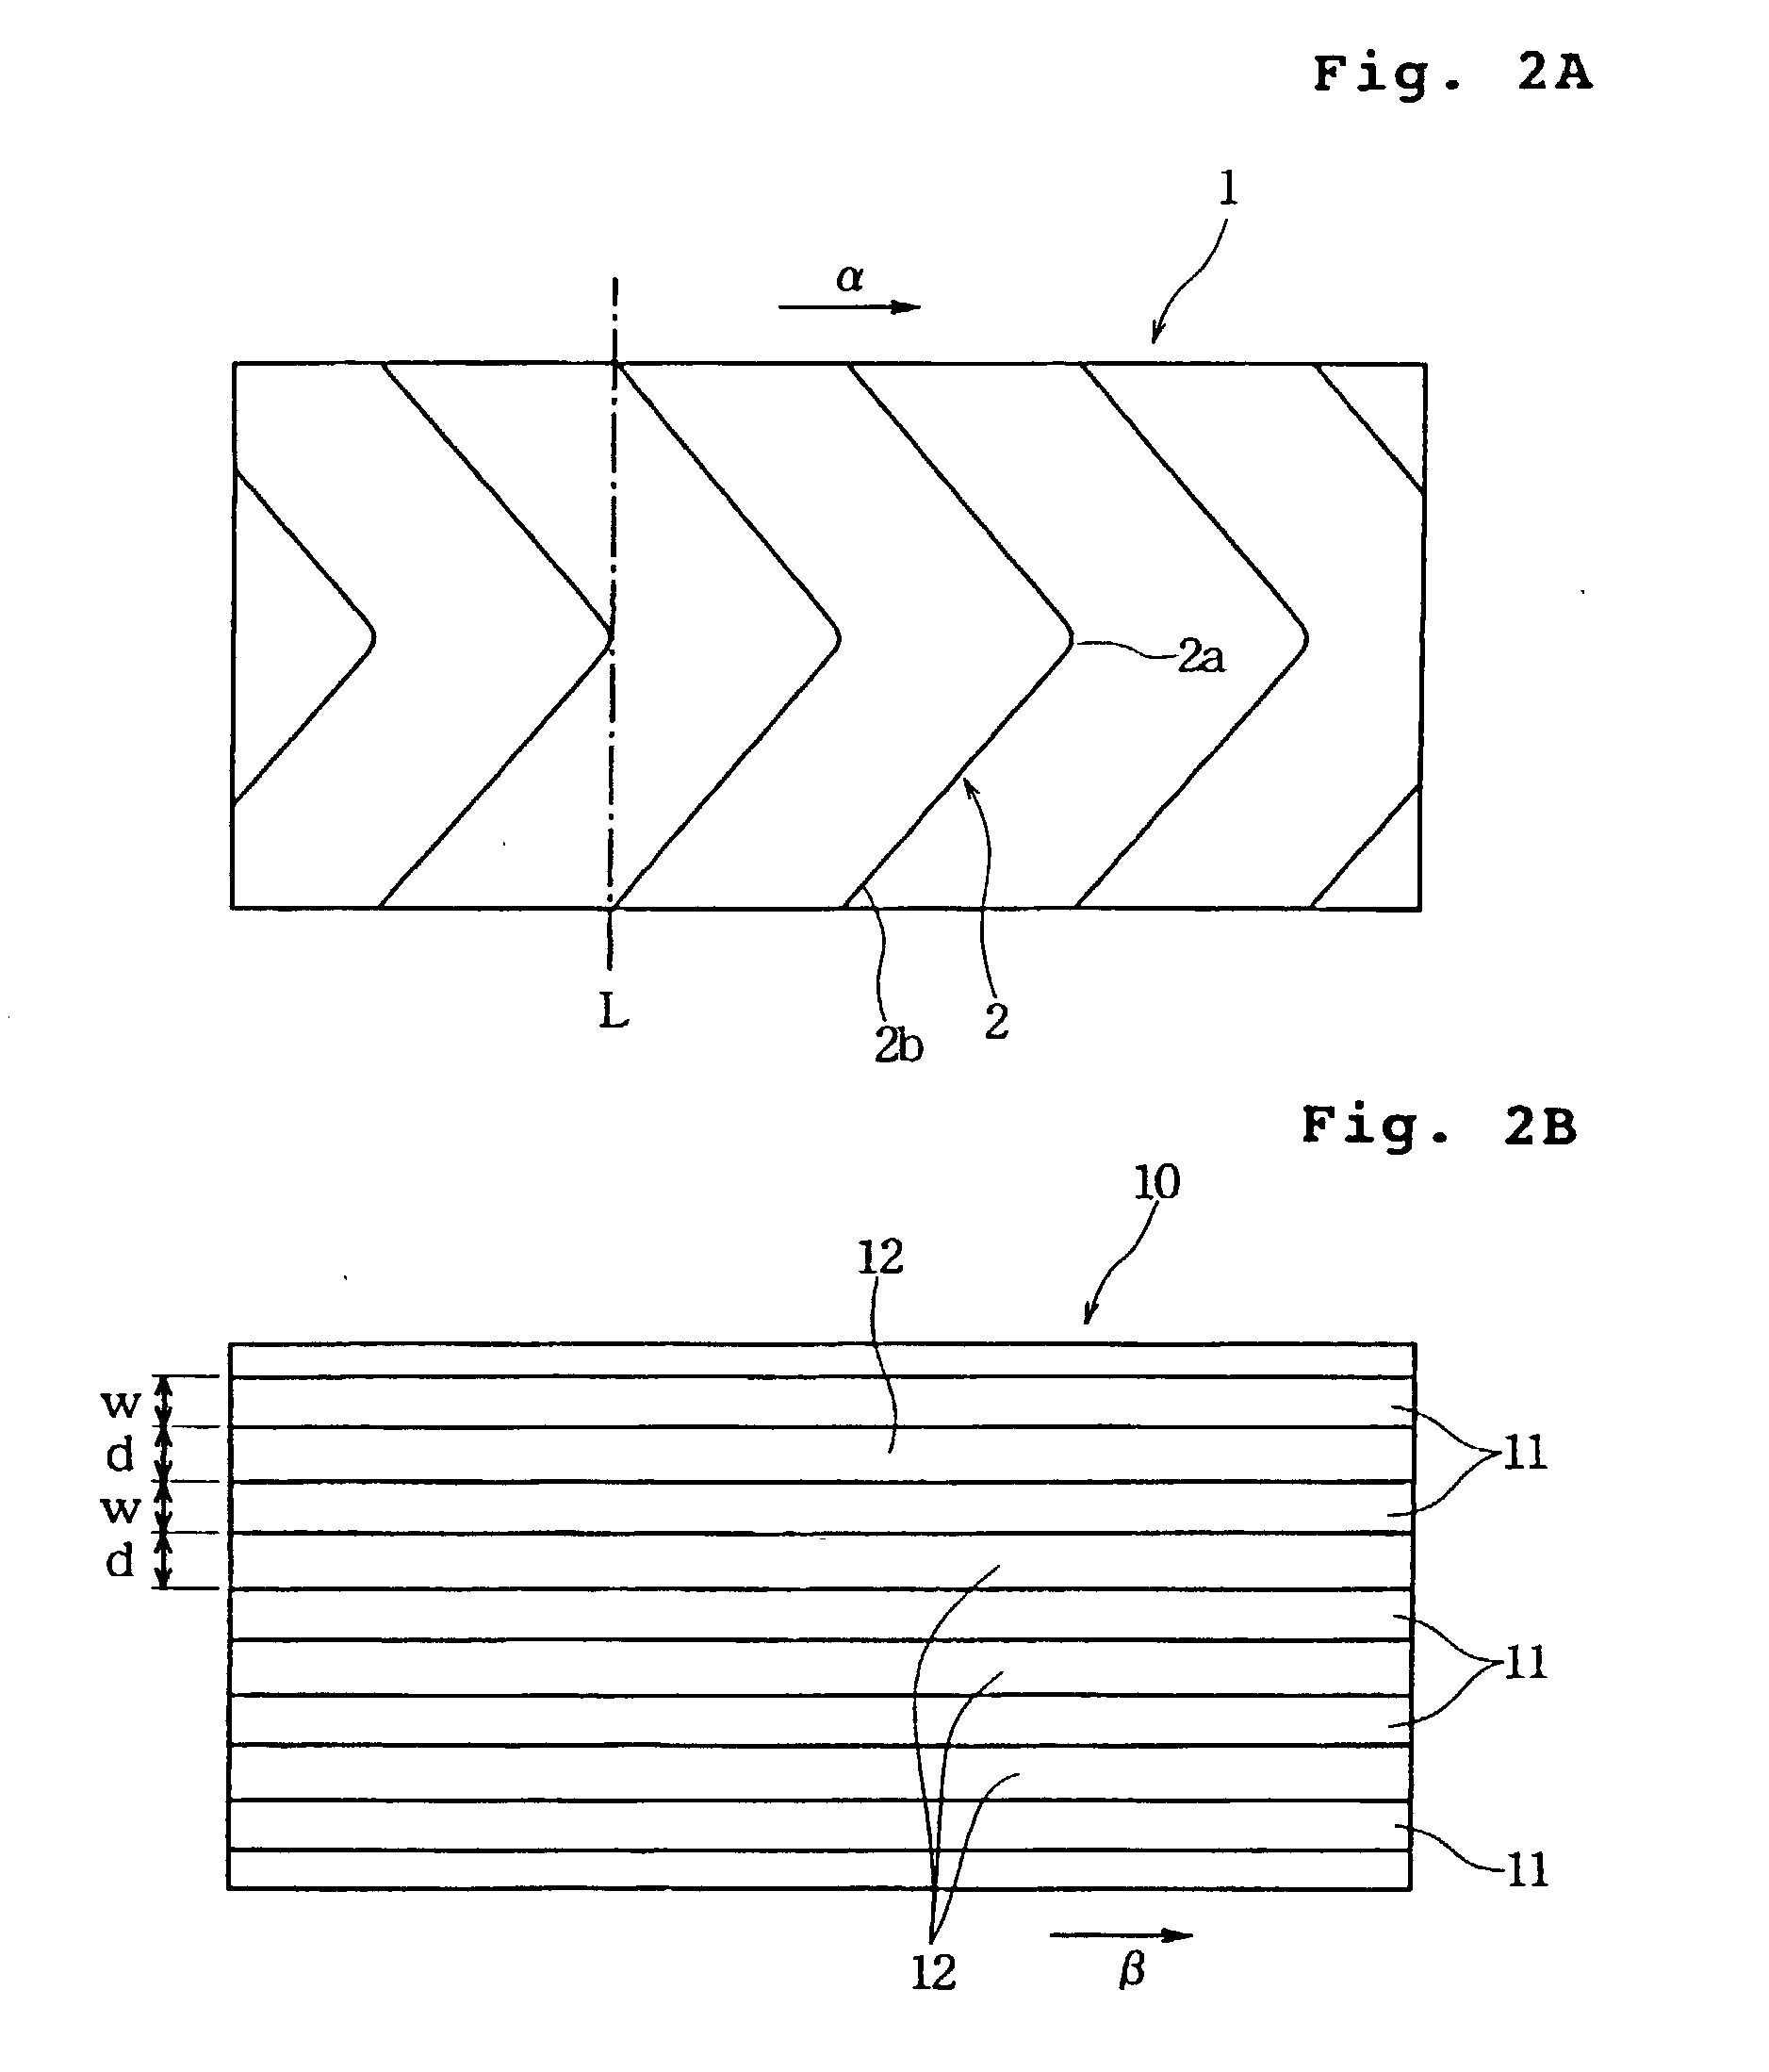 Method for forming cut lines in sheet